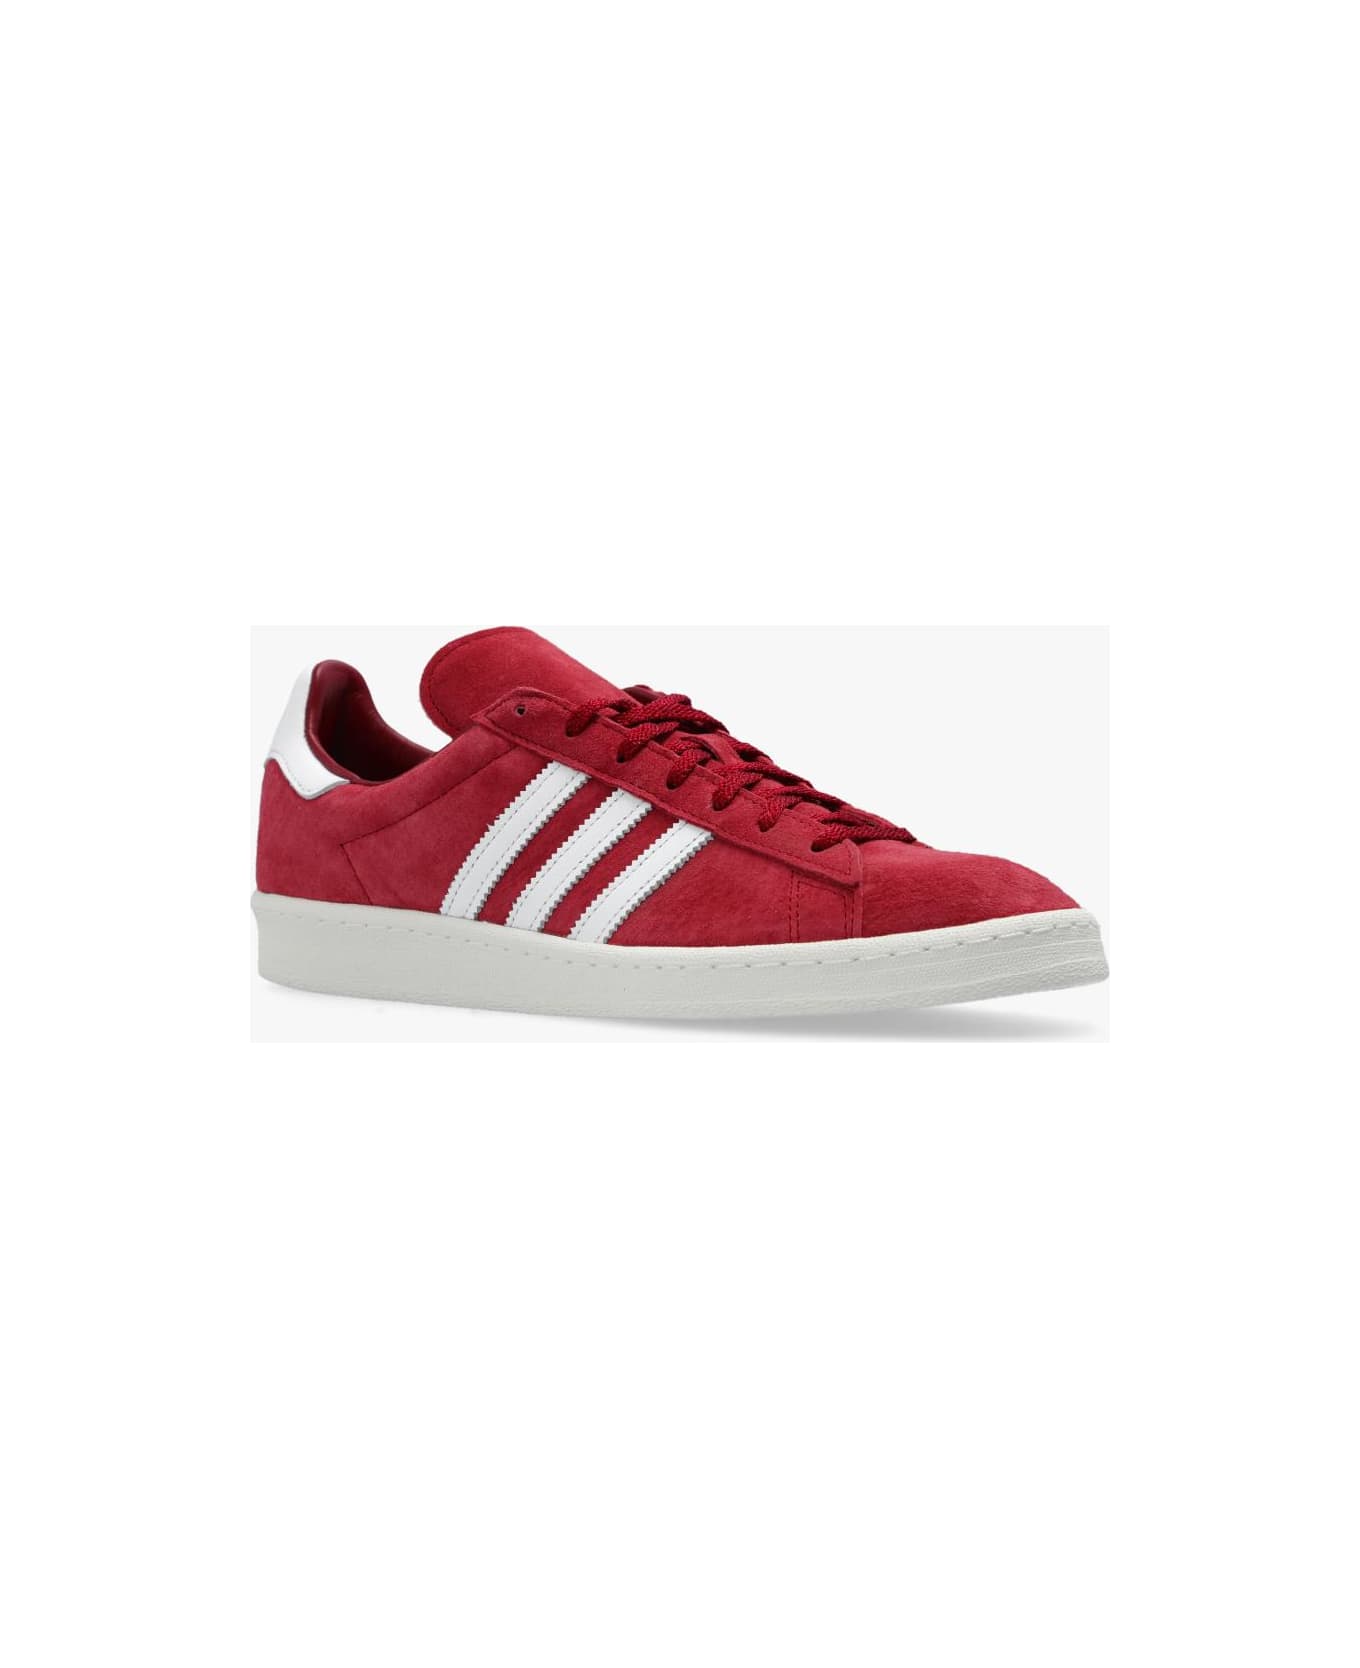 Adidas 'campus 80s' Sneakers - RED スニーカー